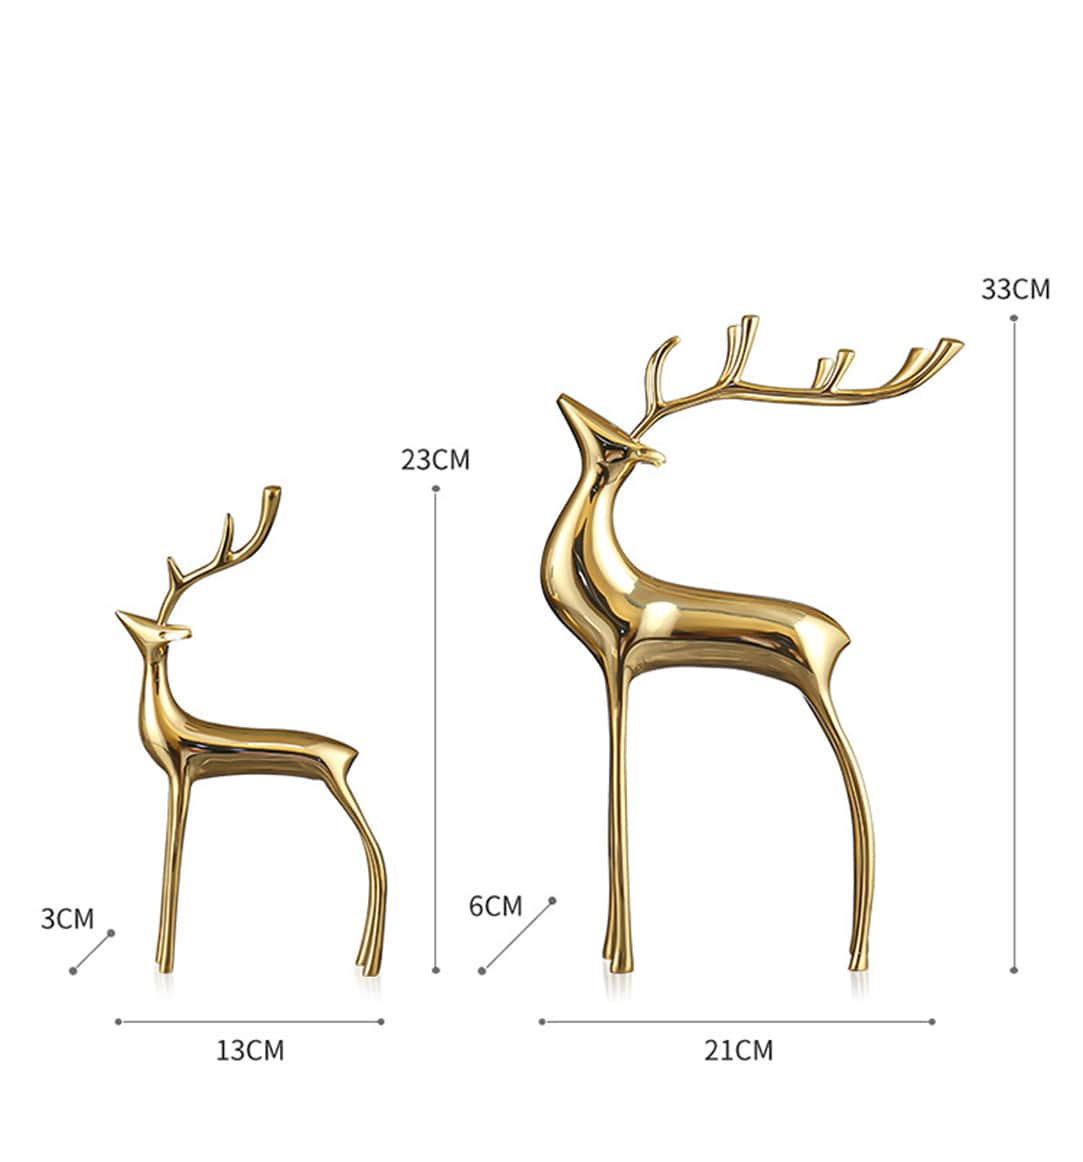 SOLID BRASS DEER Figurine Small Statue Home Ornaments Animal Figurines Gift  $13.94 - PicClick AU